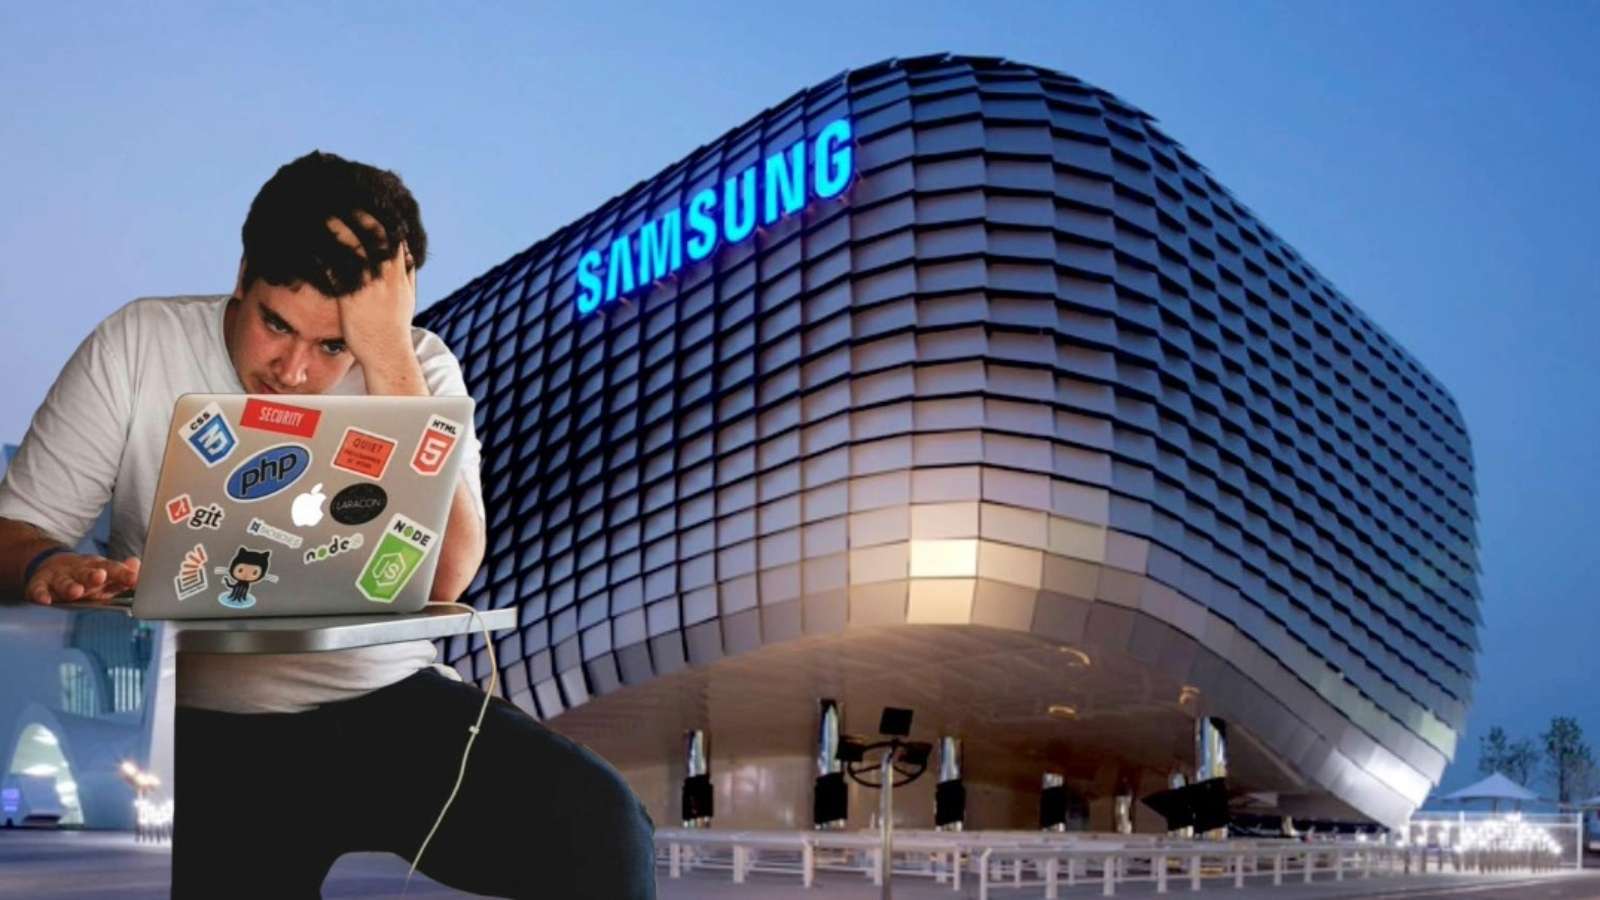 Samsung logo in the background